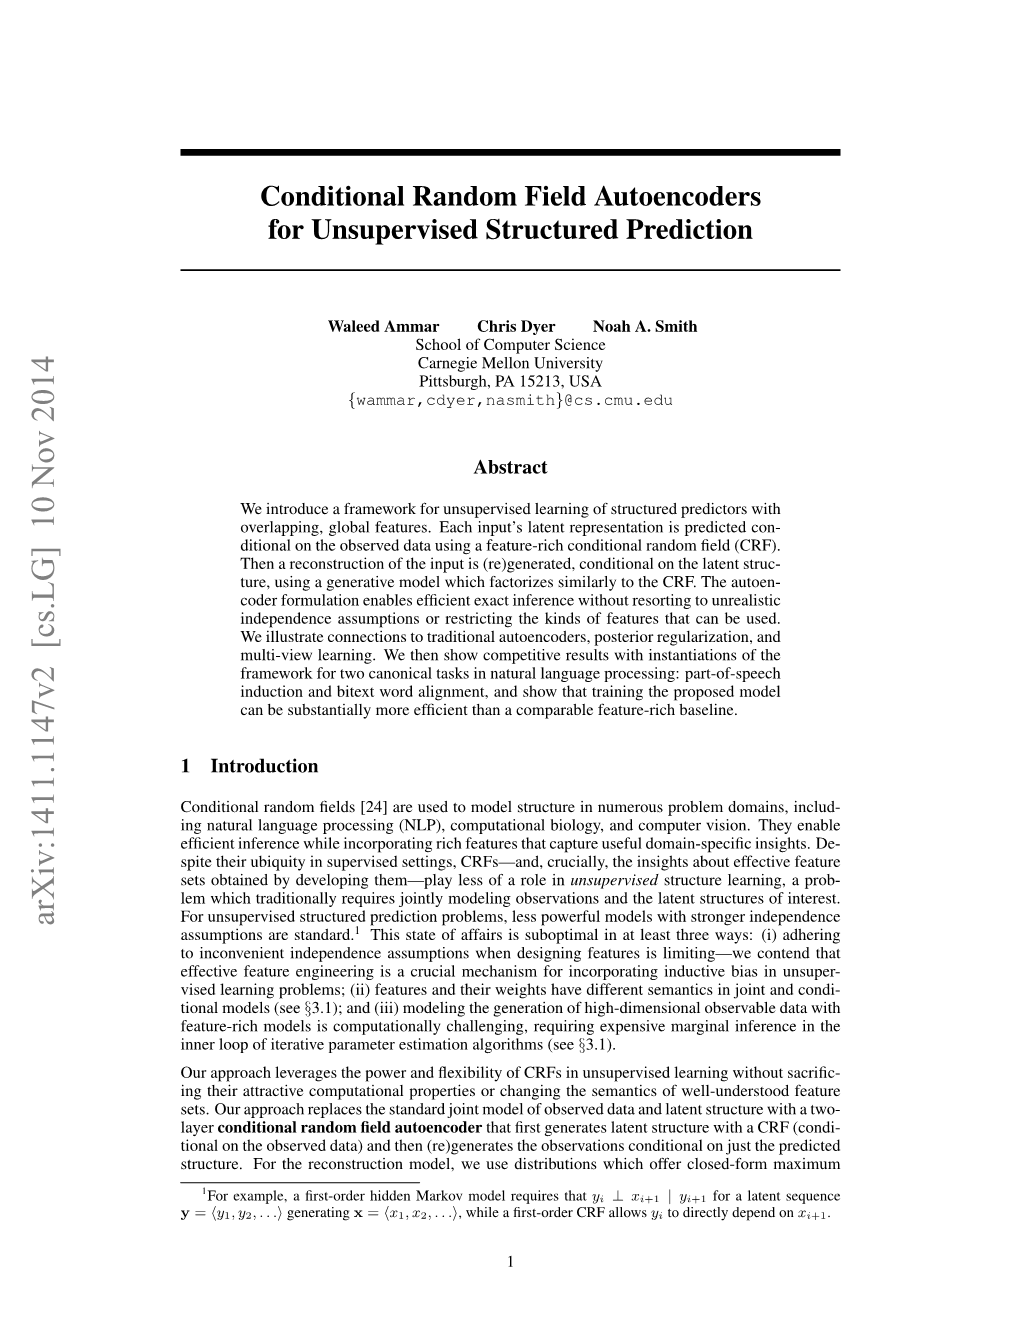 Conditional Random Field Autoencoders for Unsupervised Structured Prediction